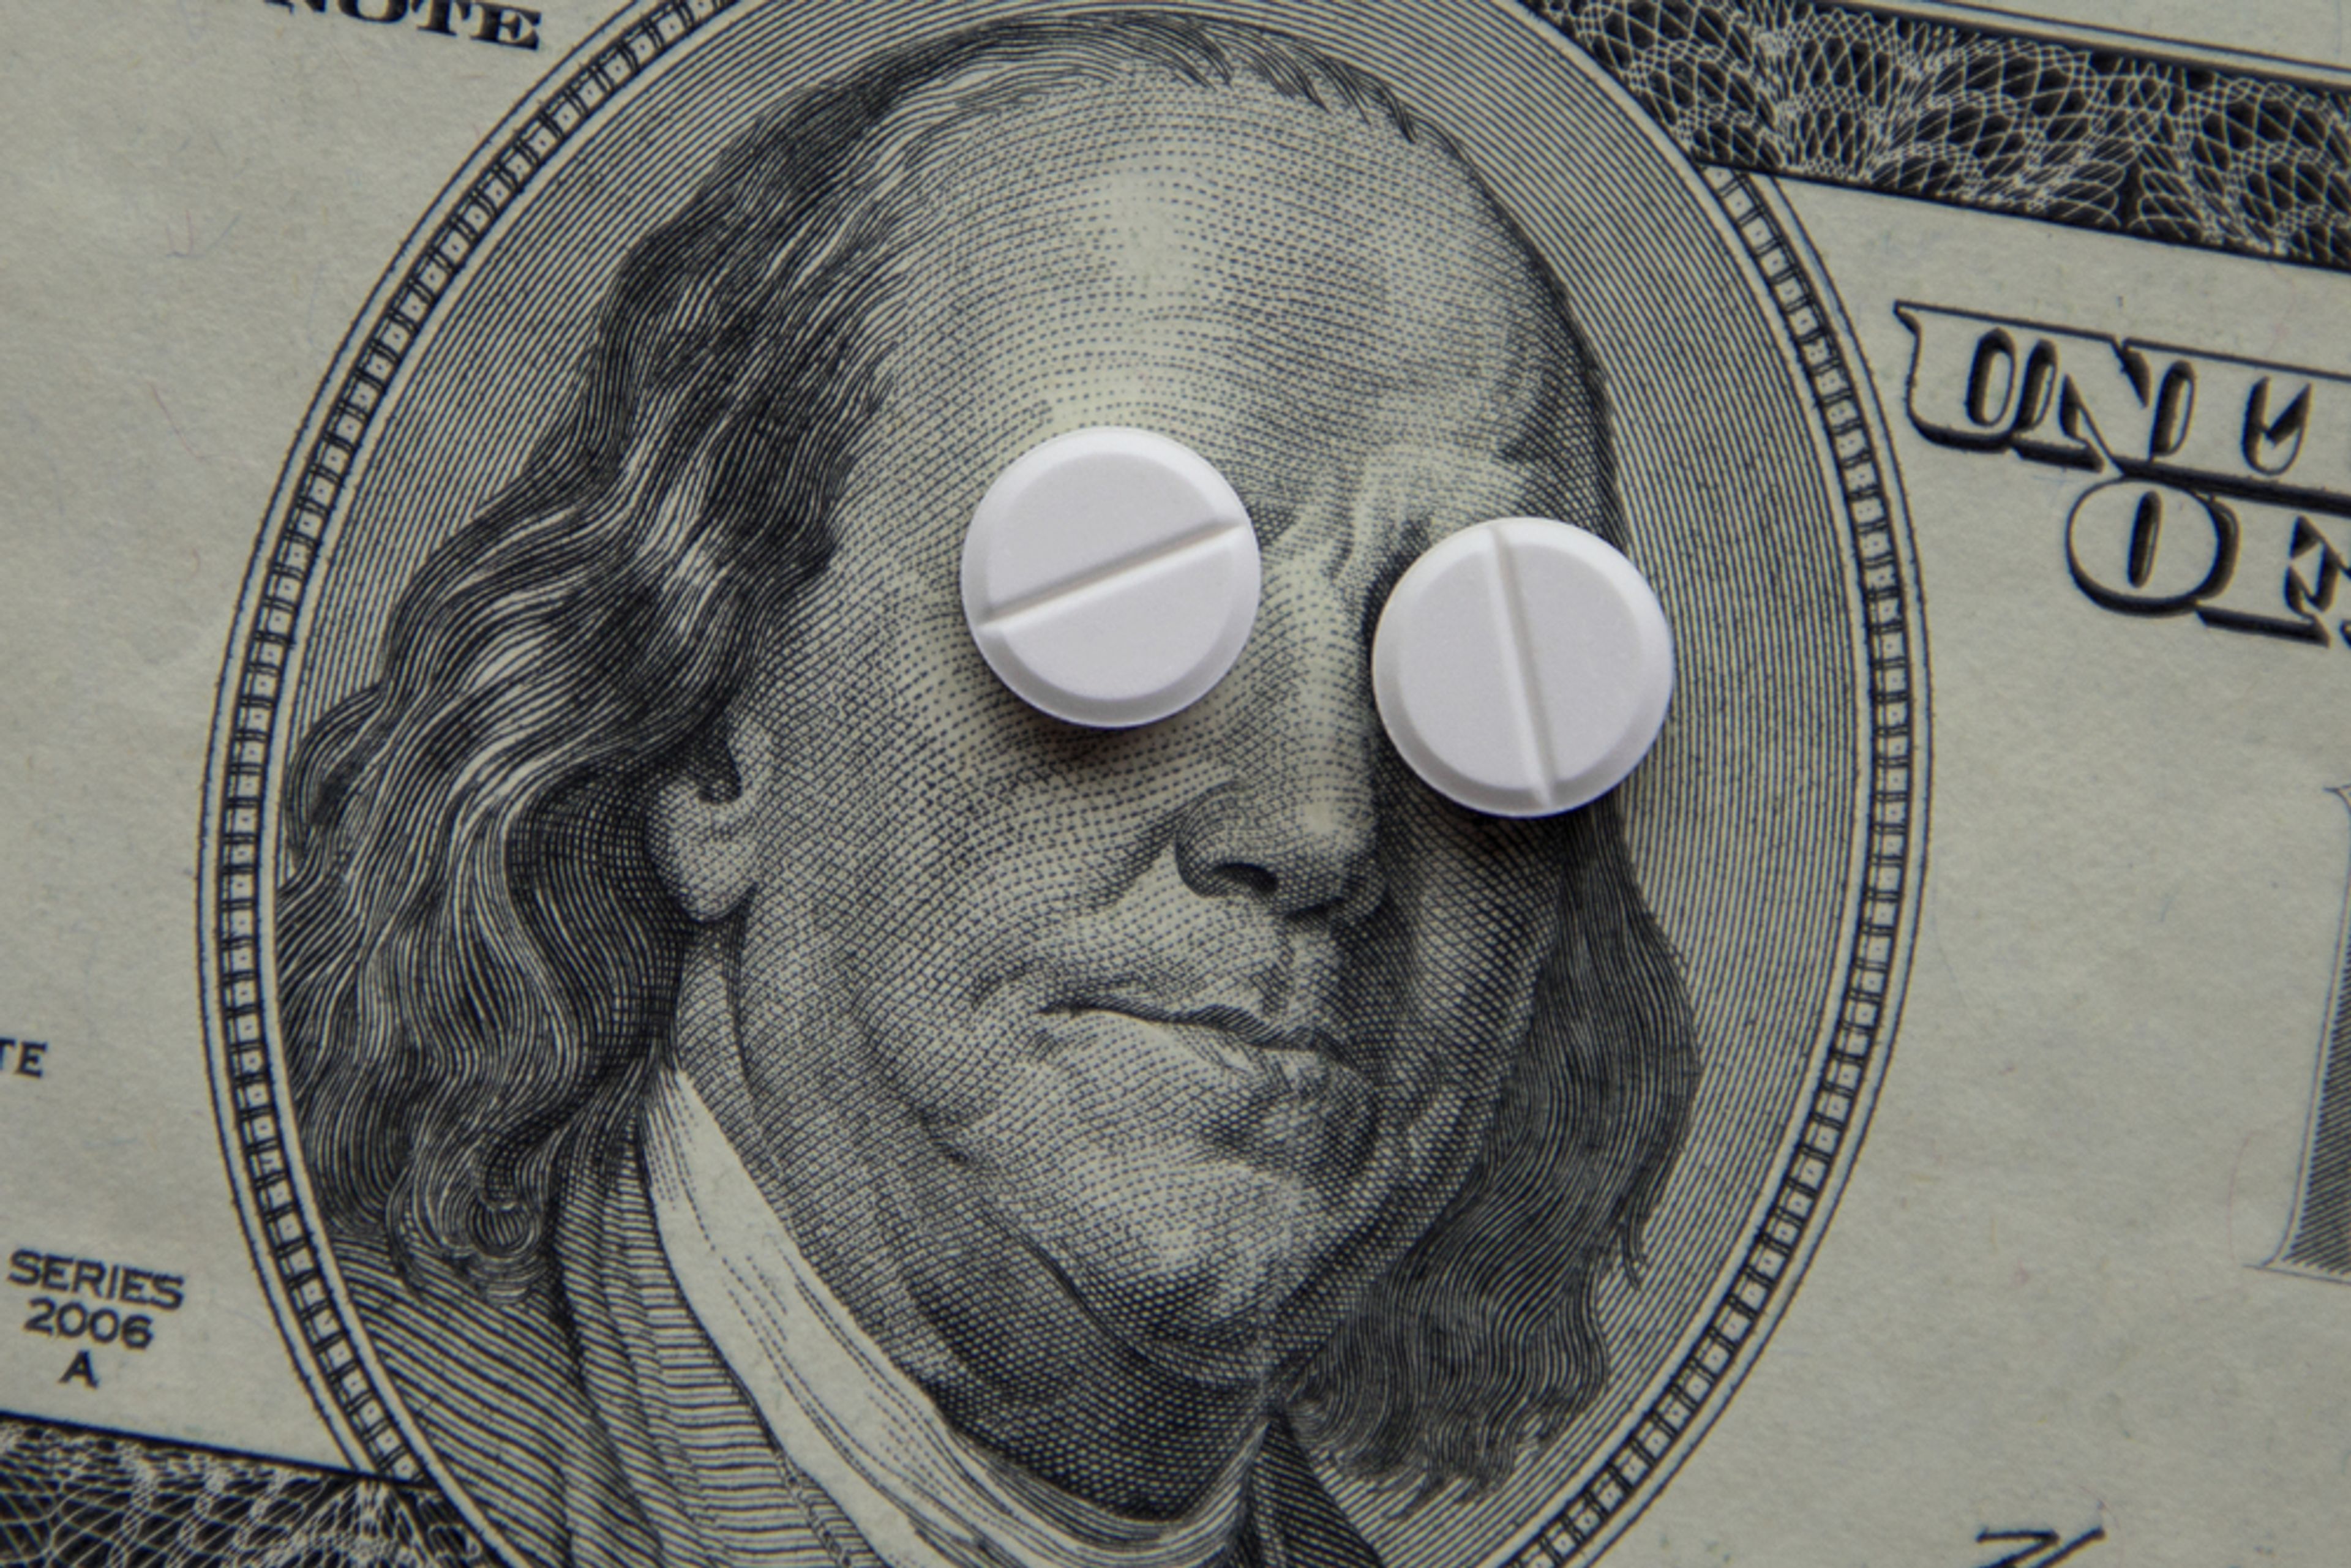 A photo of a US Dollar bill with two pills laid over the eyes of the Presidential portrait